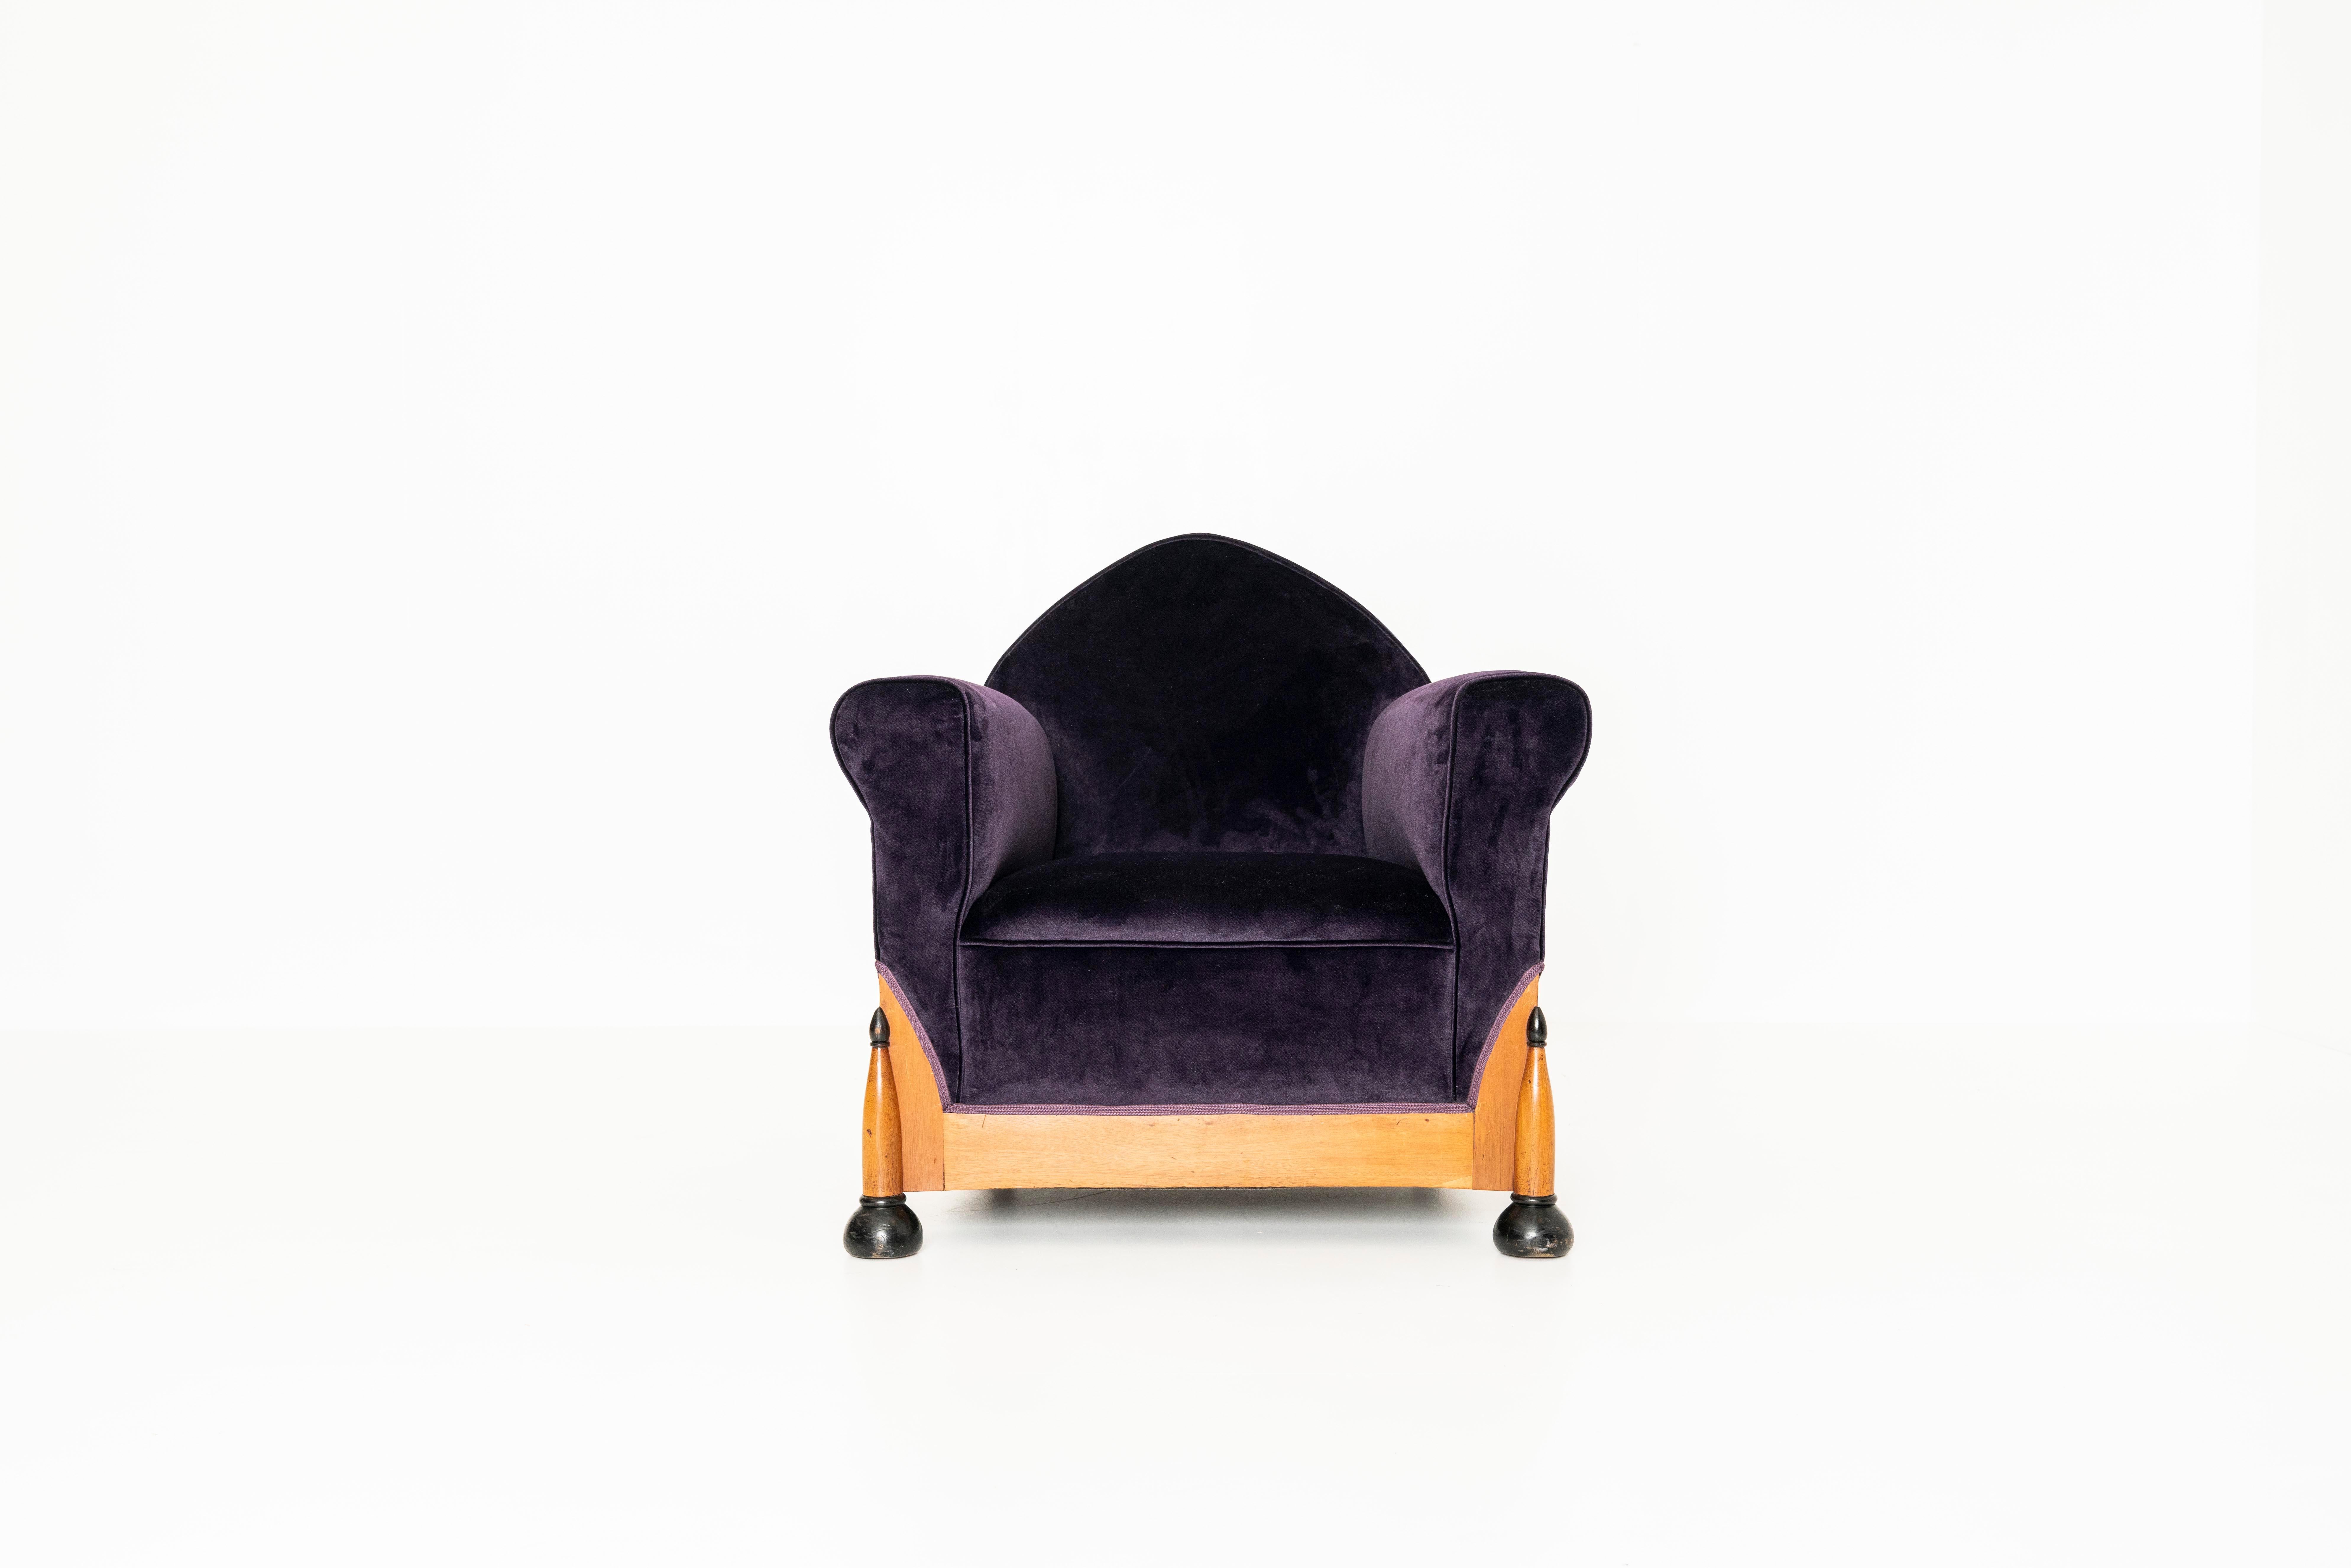 Dutch Two Amsterdam School Lounge Chairs in Purple Velvet, The Netherlands 1930s